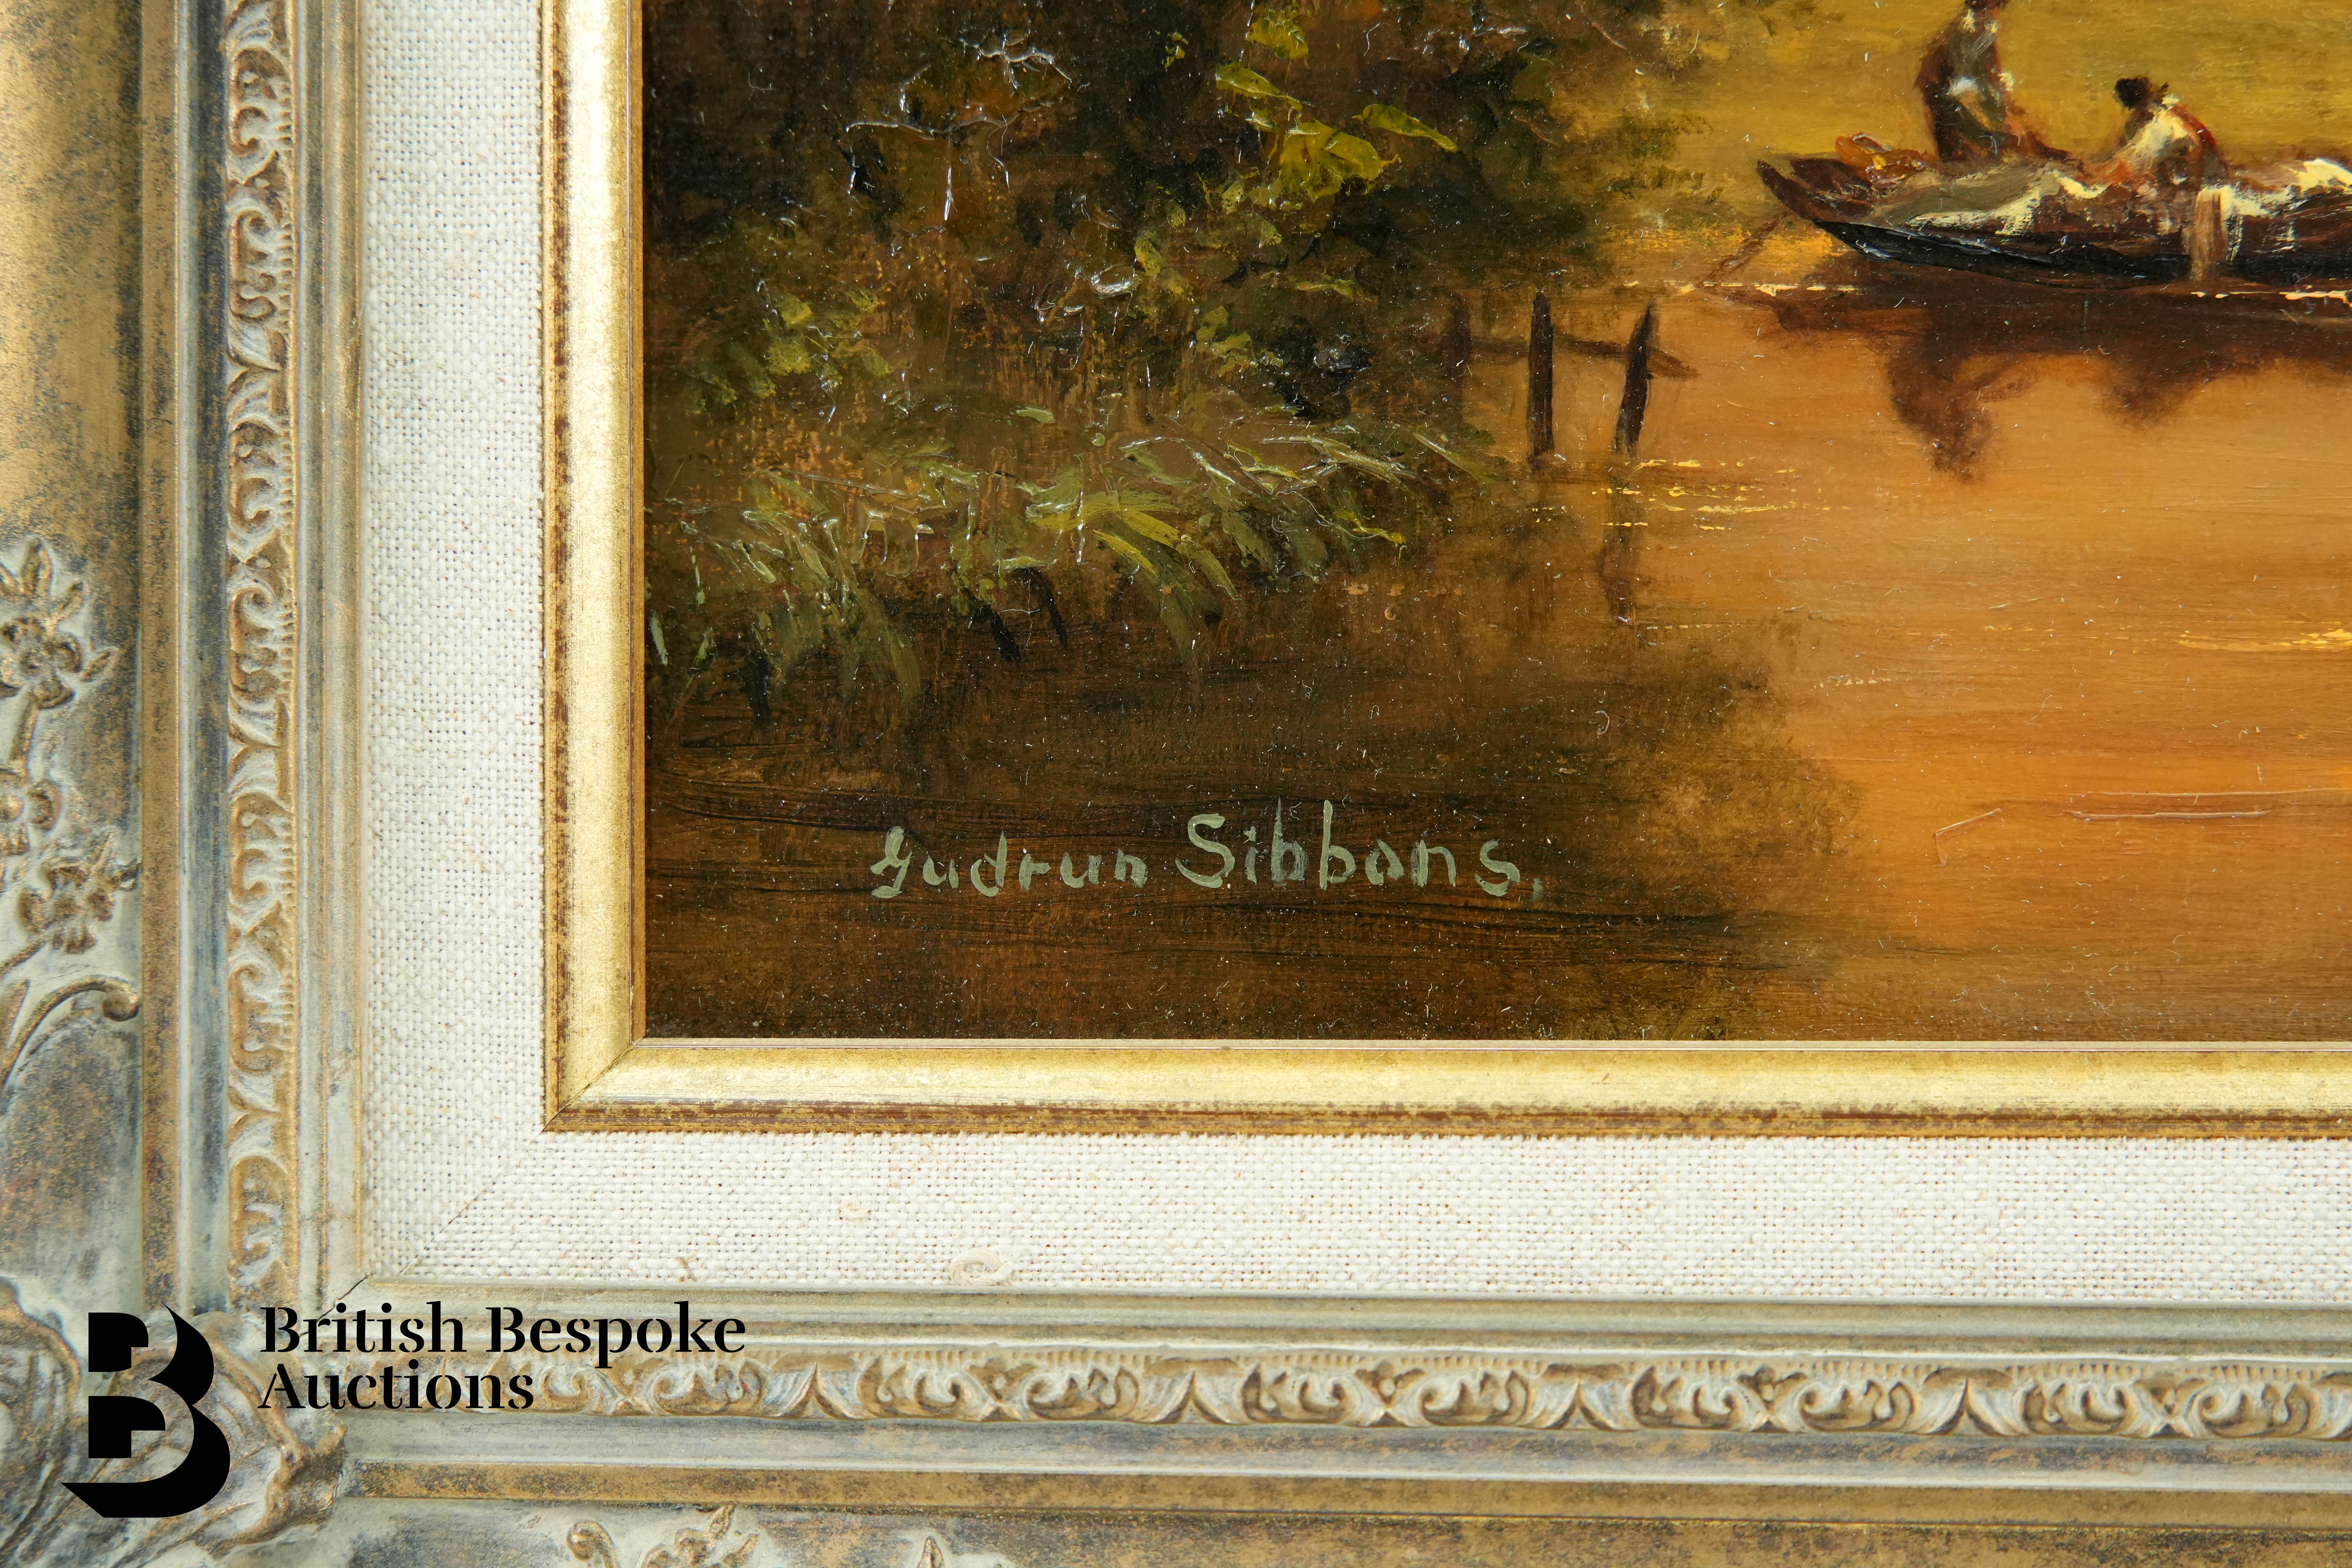 Gudrun Sibbons Oil on Board - Image 6 of 6